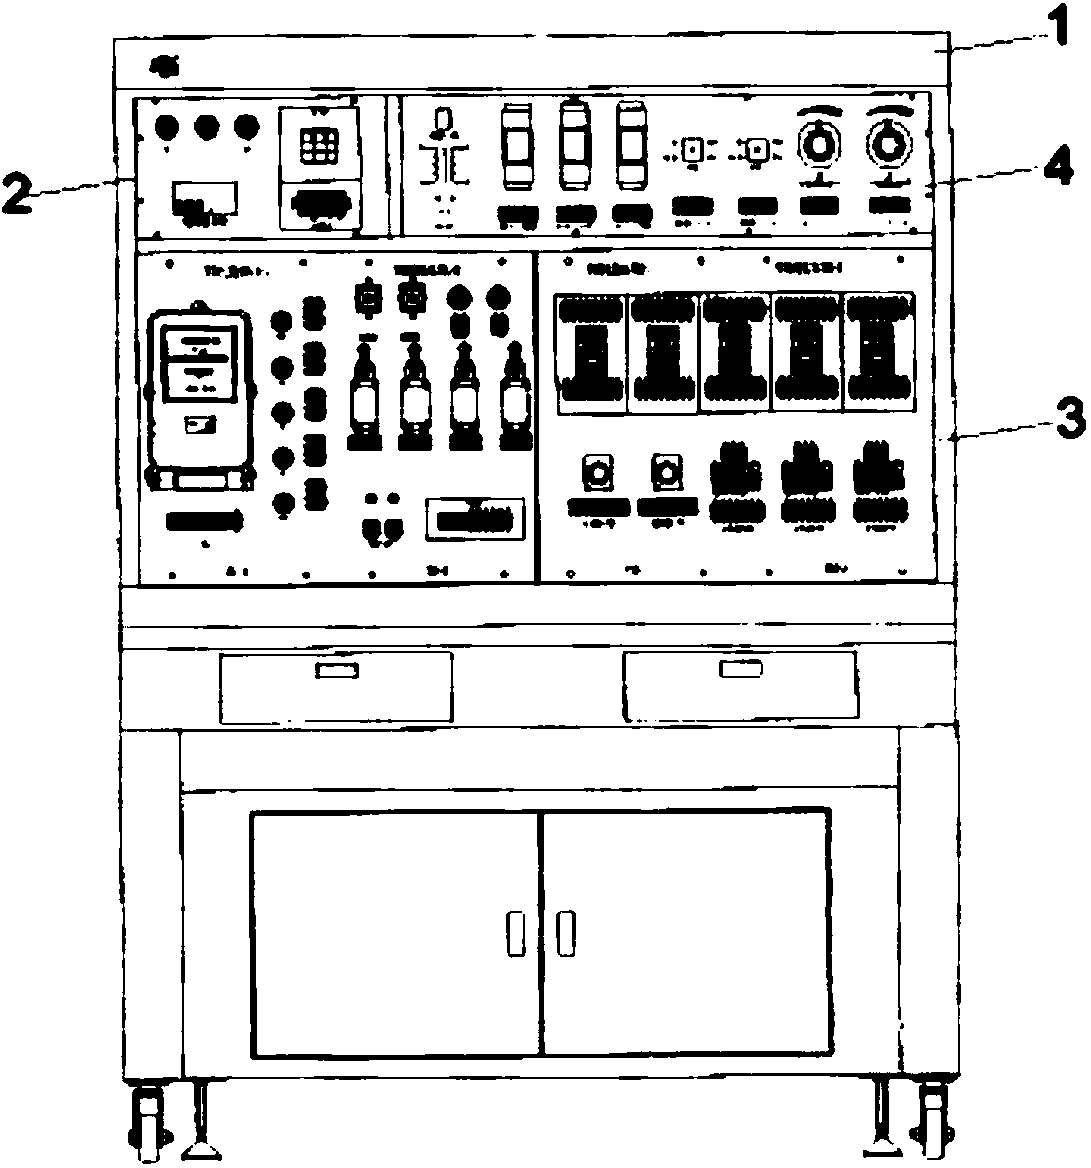 Electrician training and examination apparatus